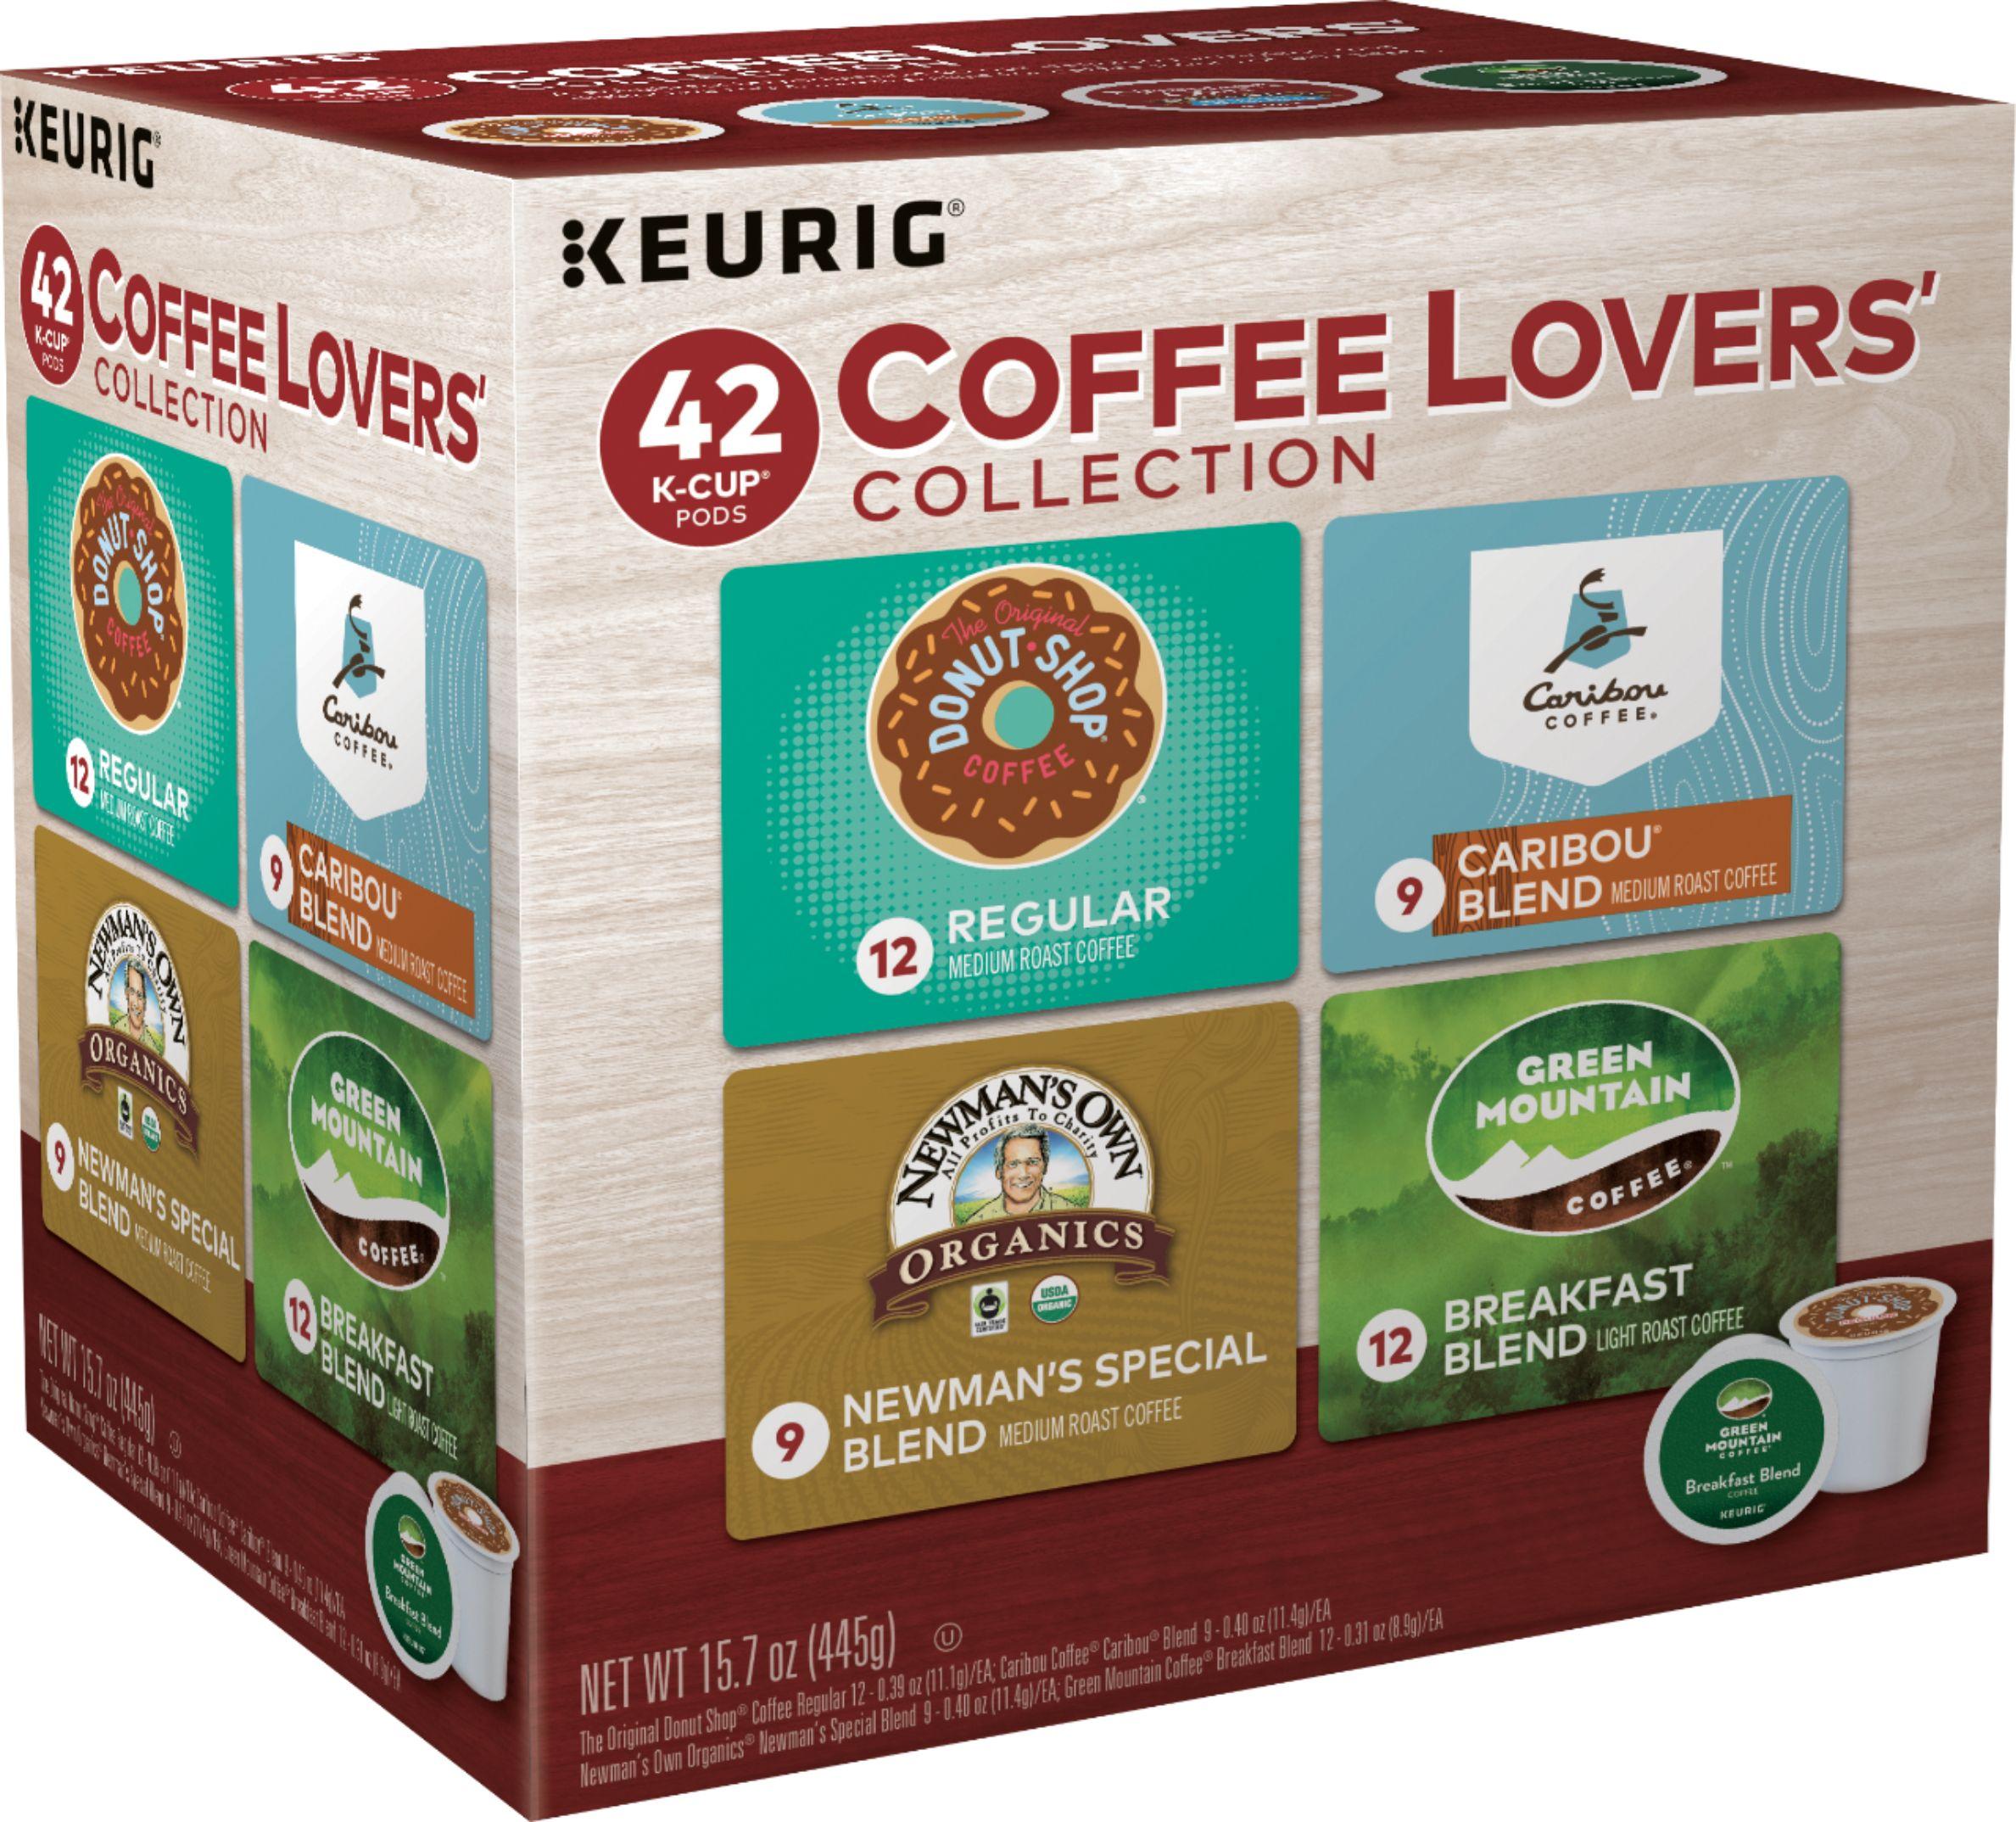 42 Keurig Coffee Lovers Collection K-Cup Pods for $19.99